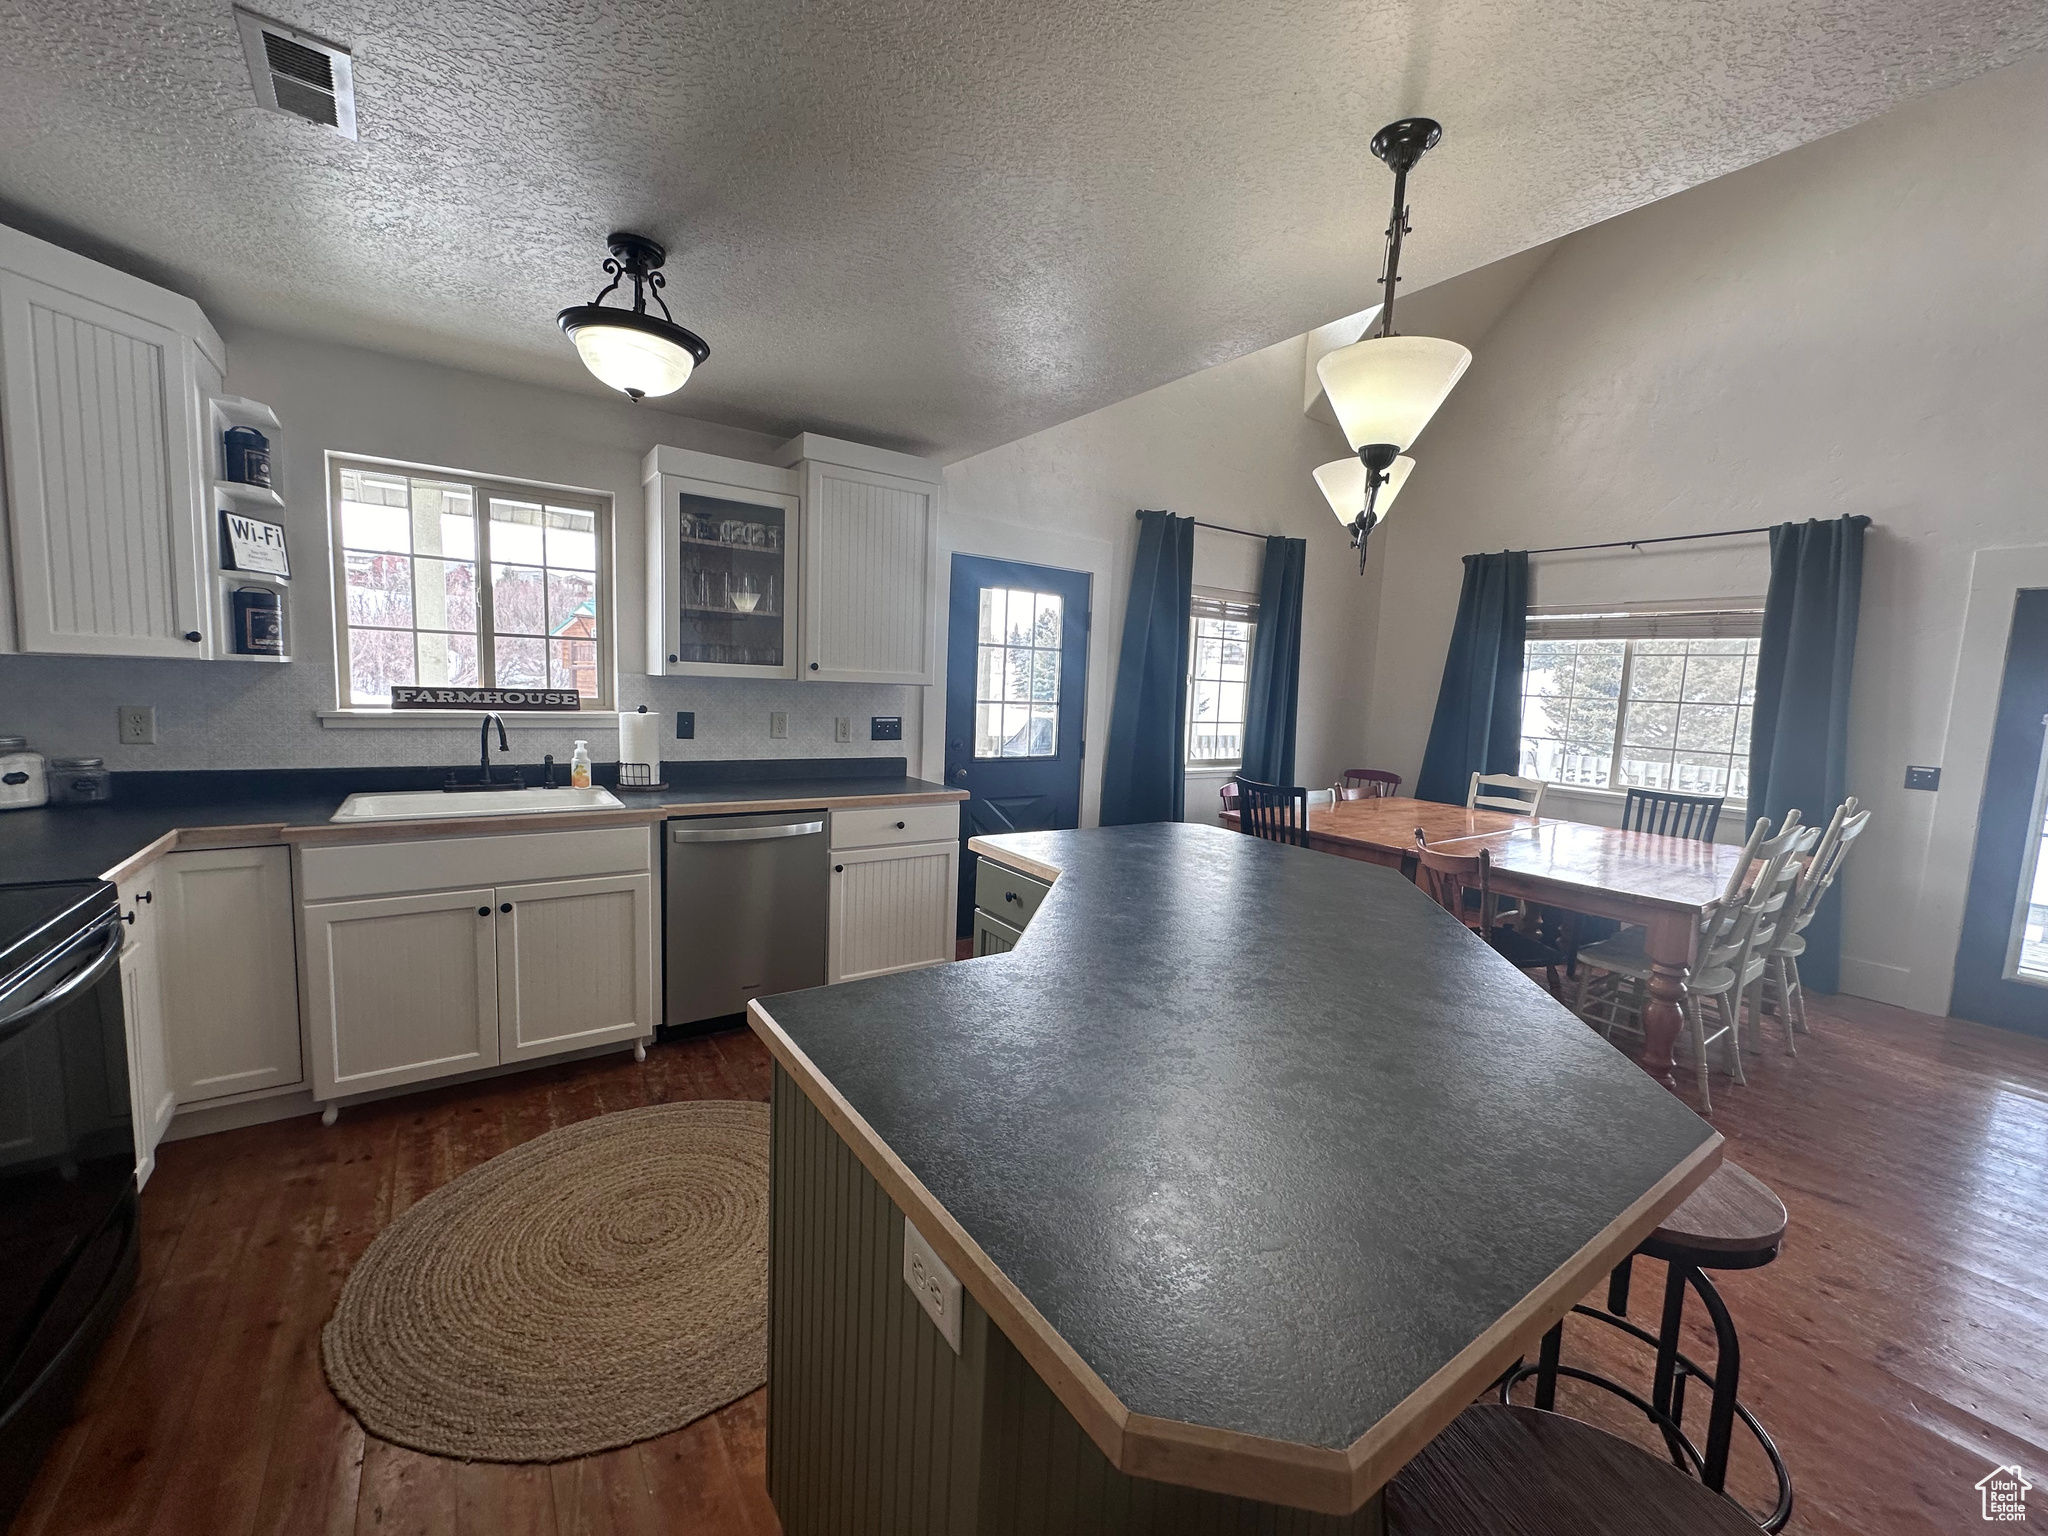 Kitchen with sink, white cabinets, hanging light fixtures, dishwasher, and hard wood  flooring